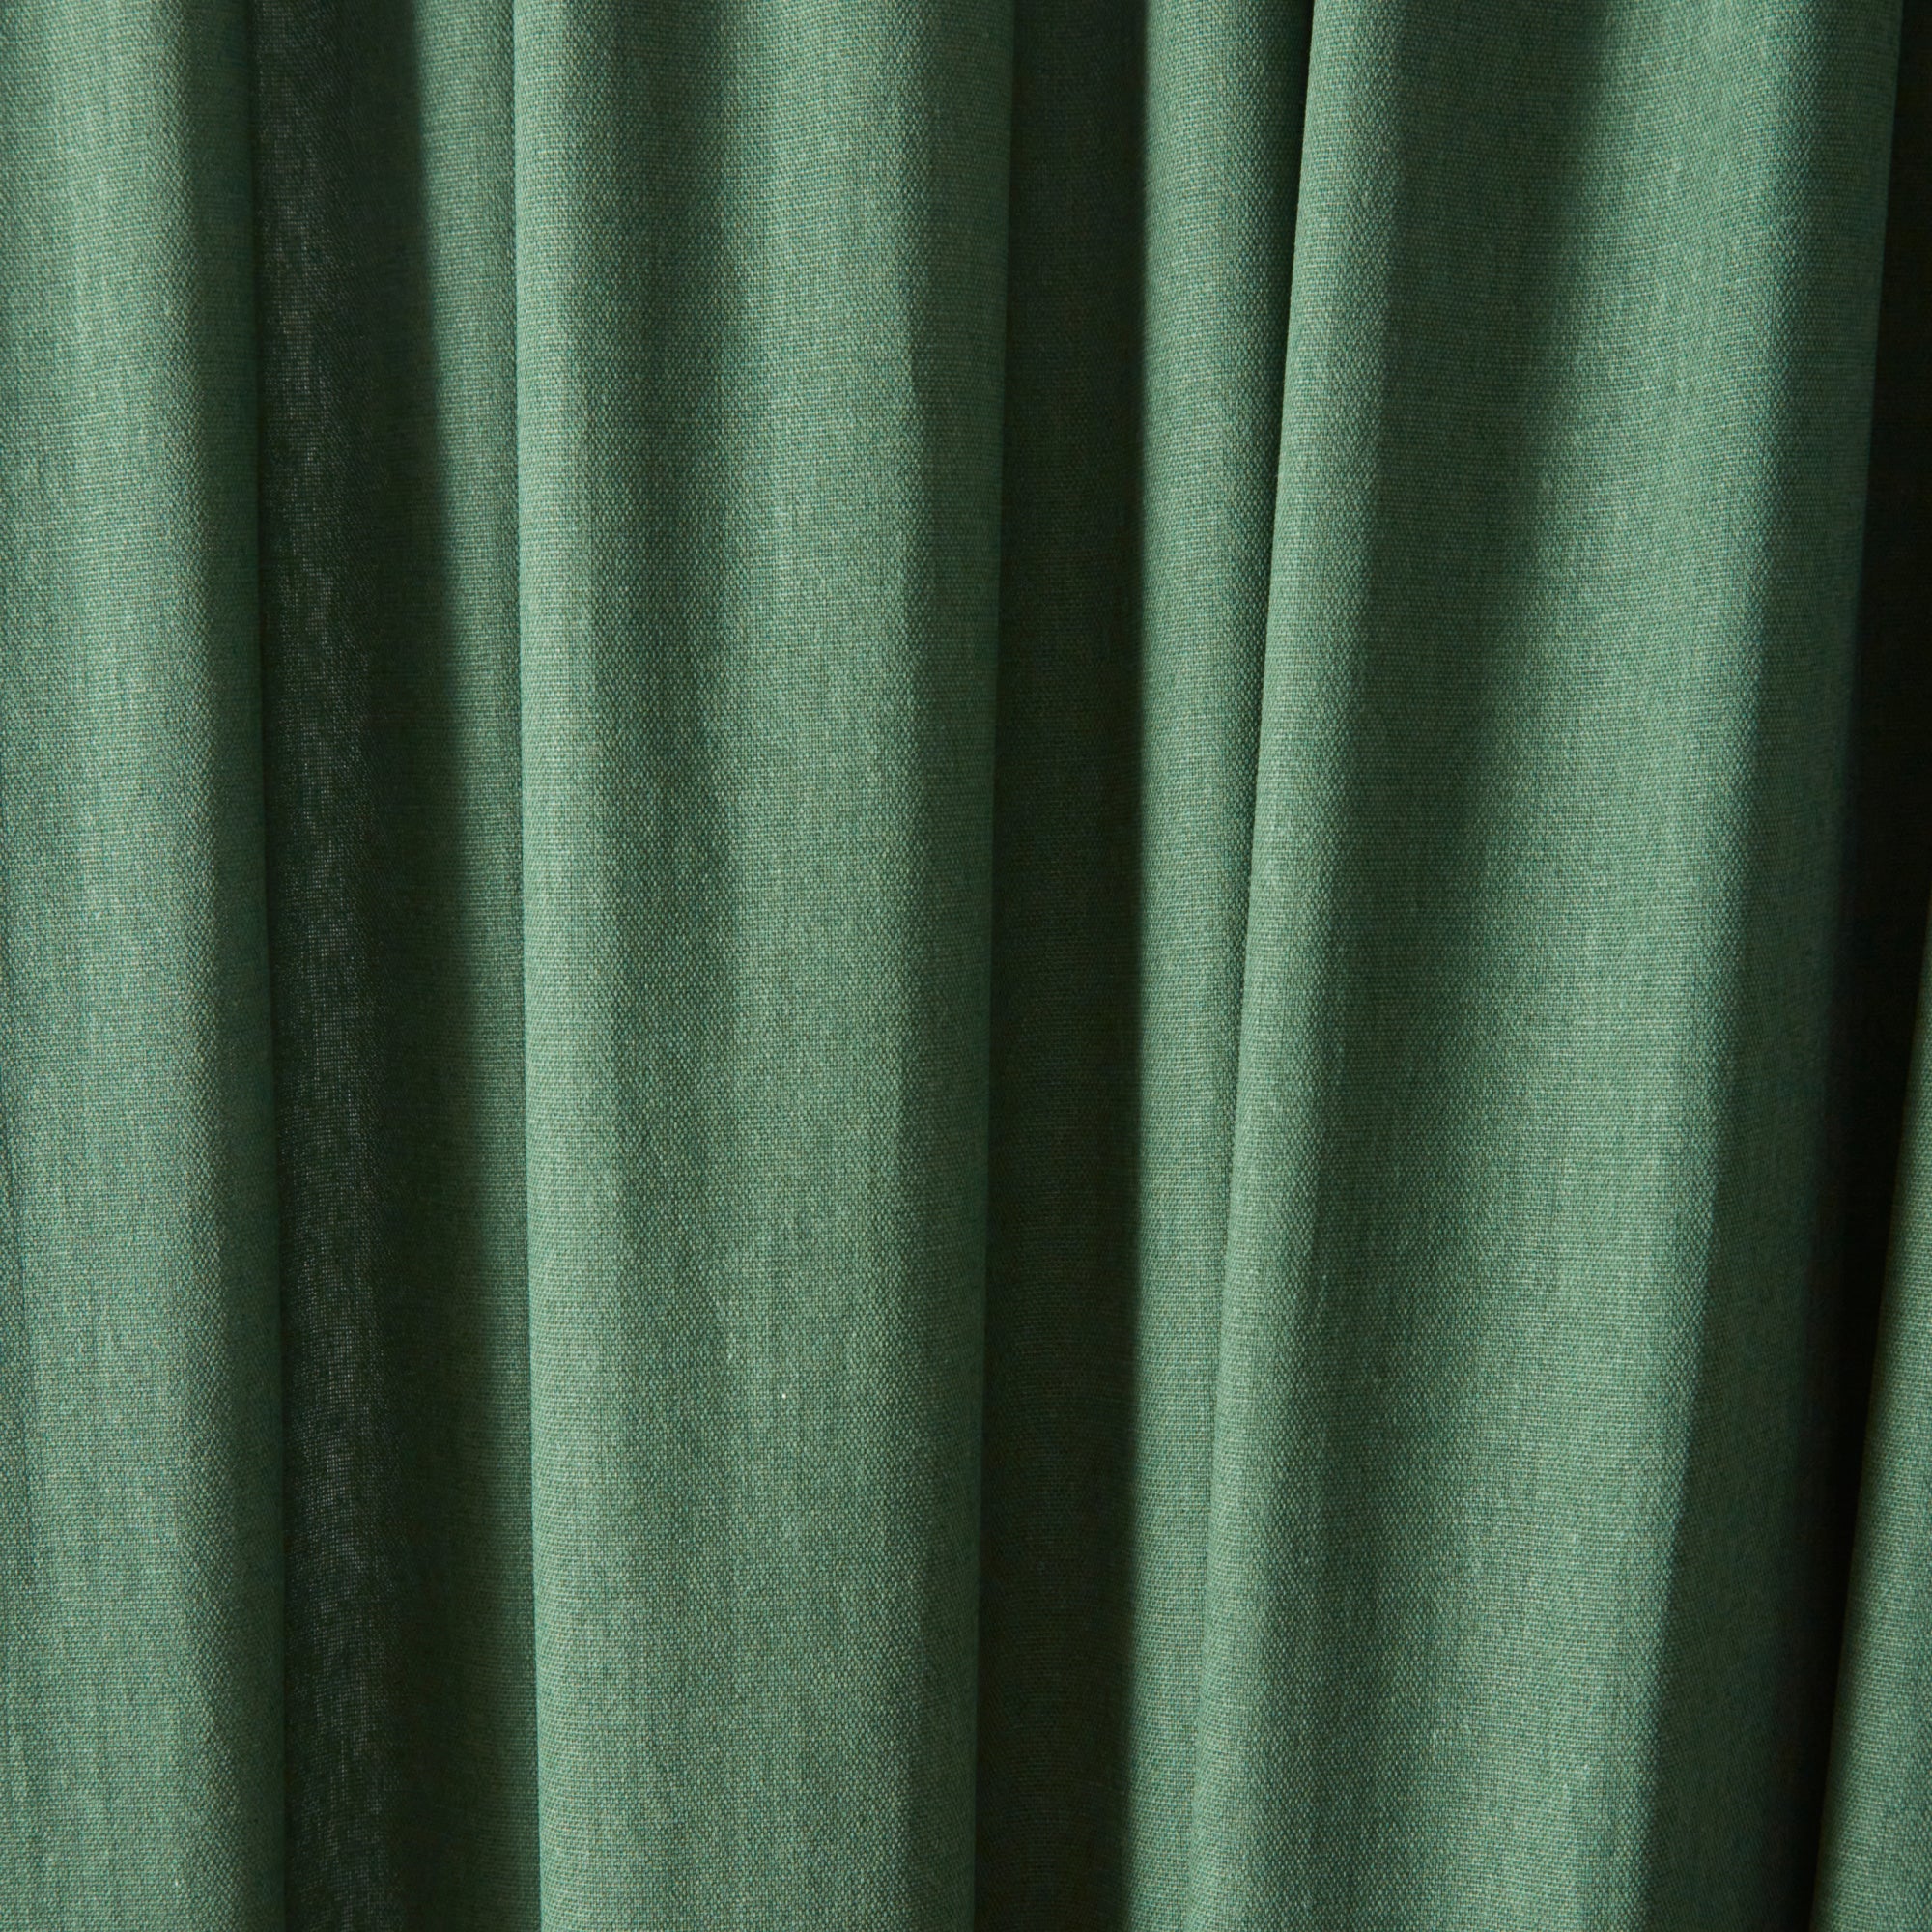 Pair of Pencil Pleat Curtains Dijon by Fusion in Bottle Green